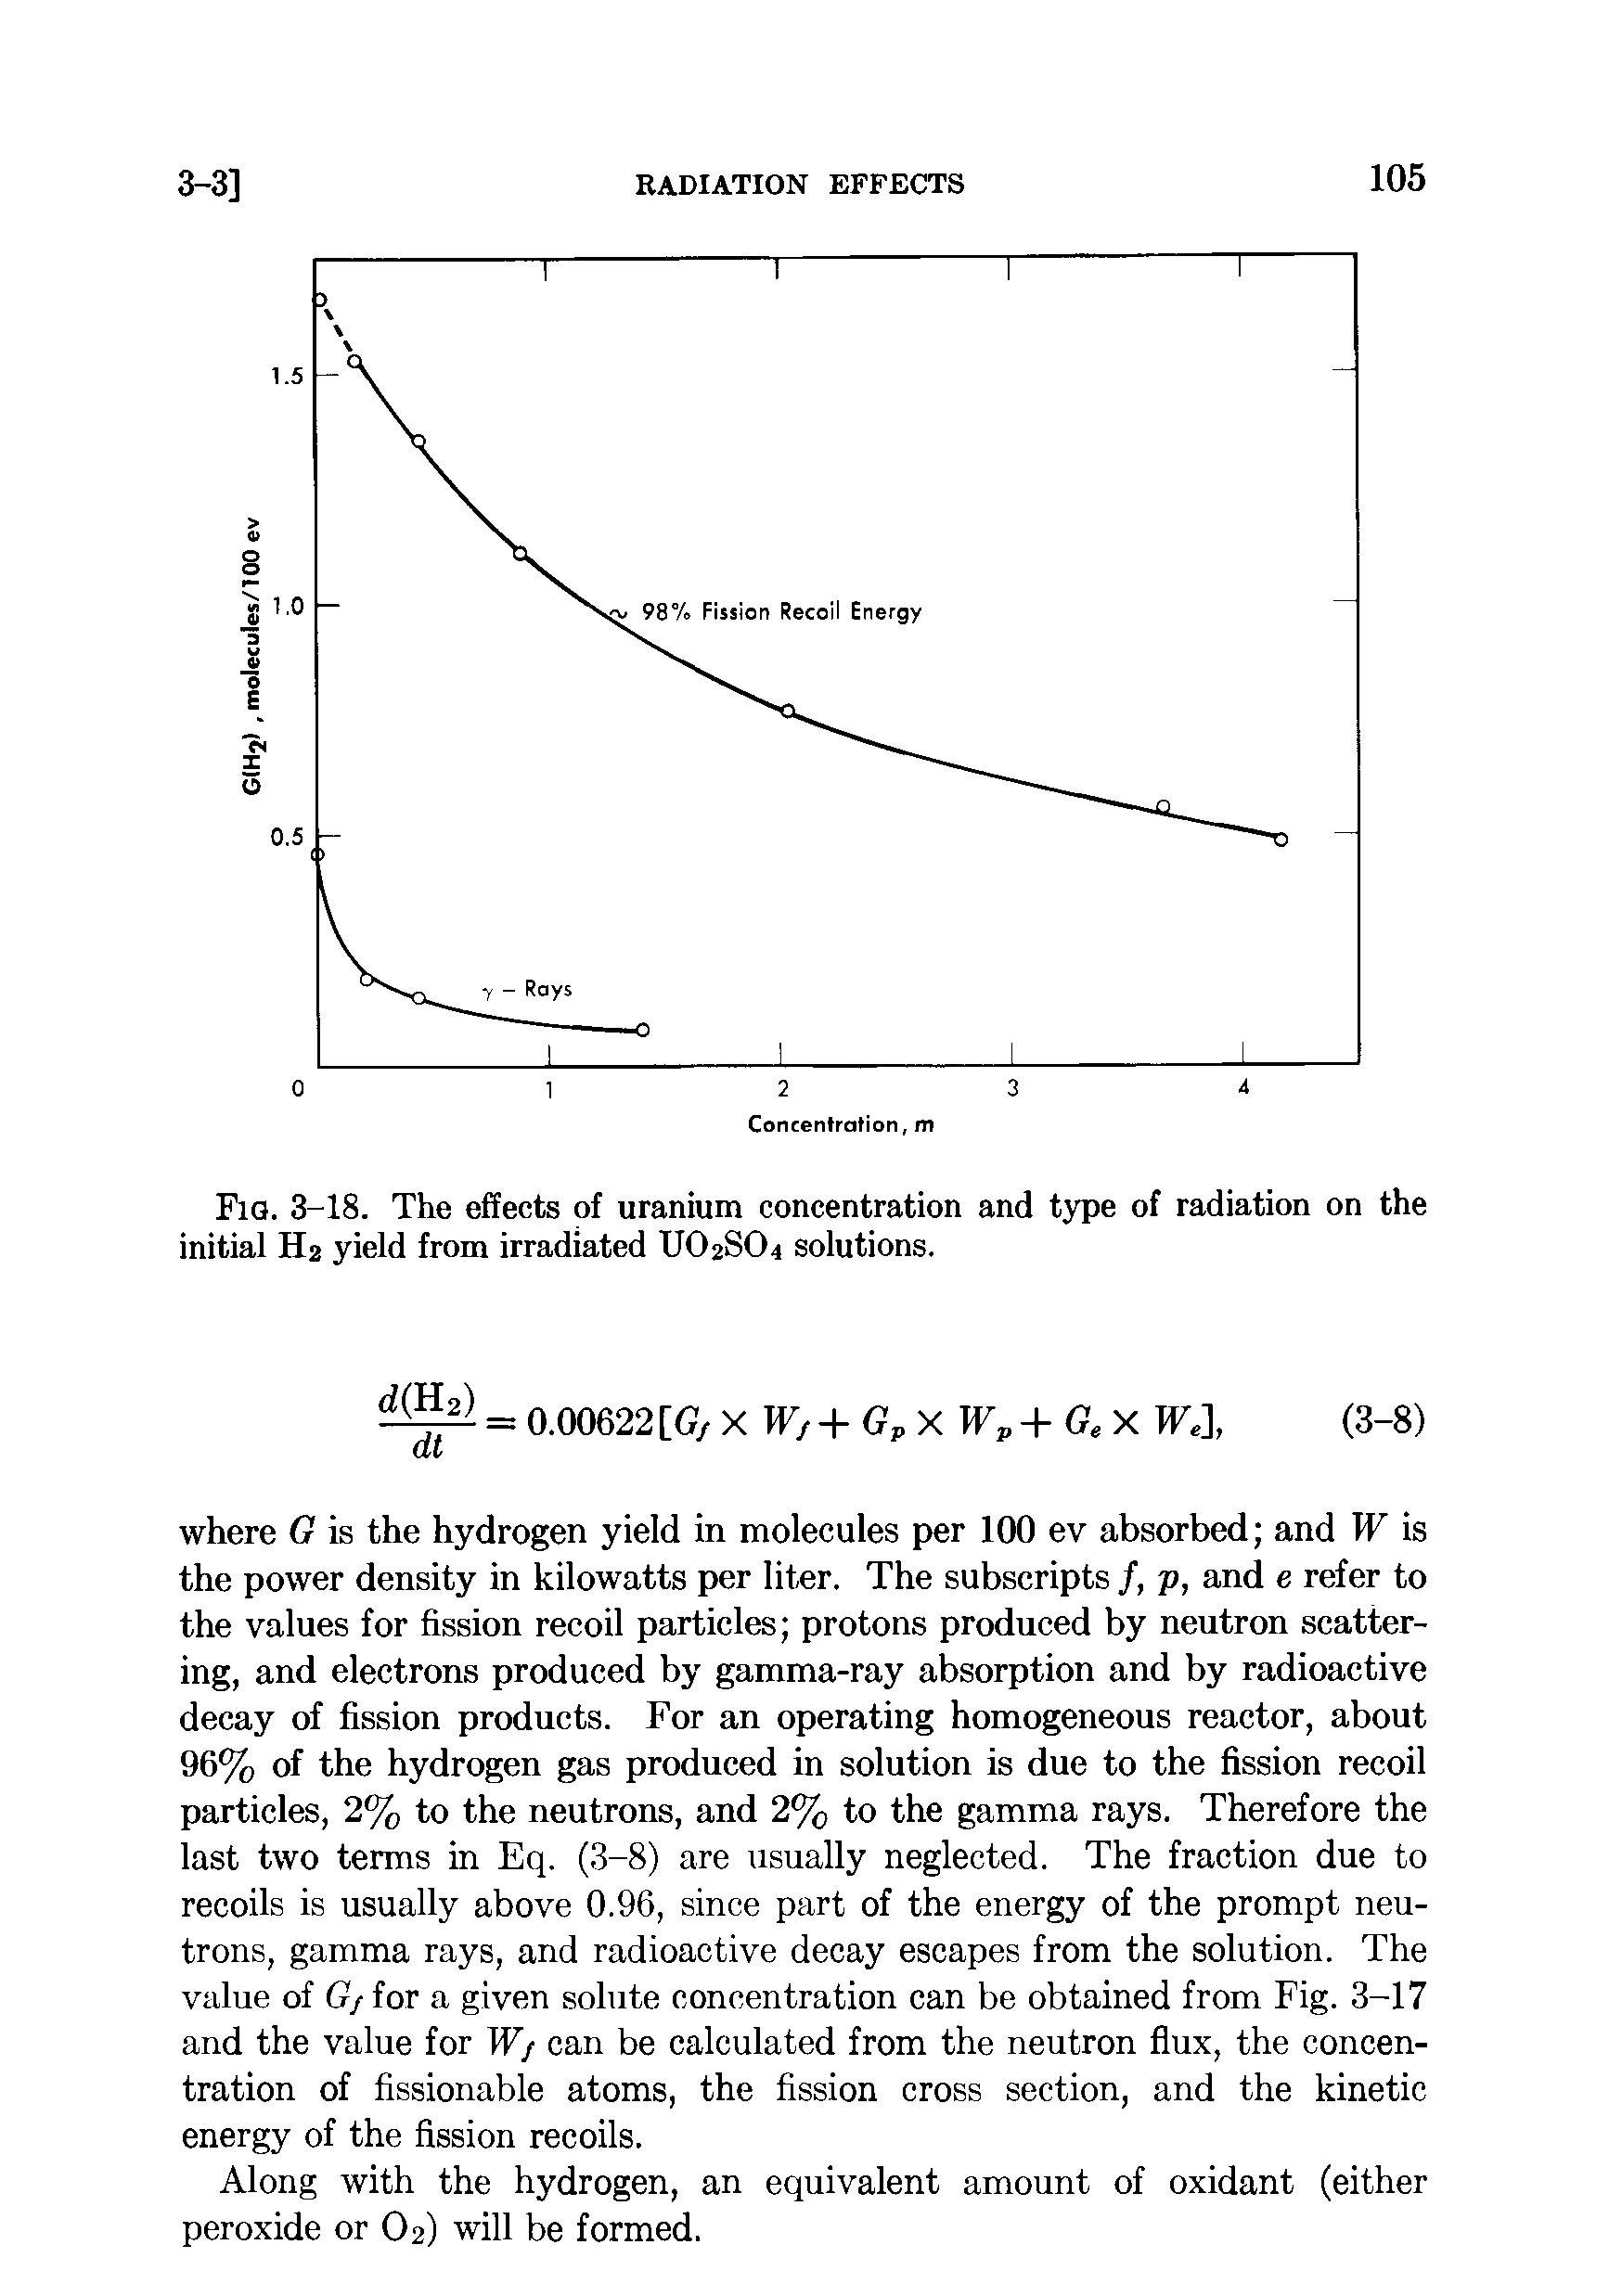 Fig. 3-18. The effects of uranium concentration and type of radiation on the initial H2 yield from irradiated UO2SO4 solutions.